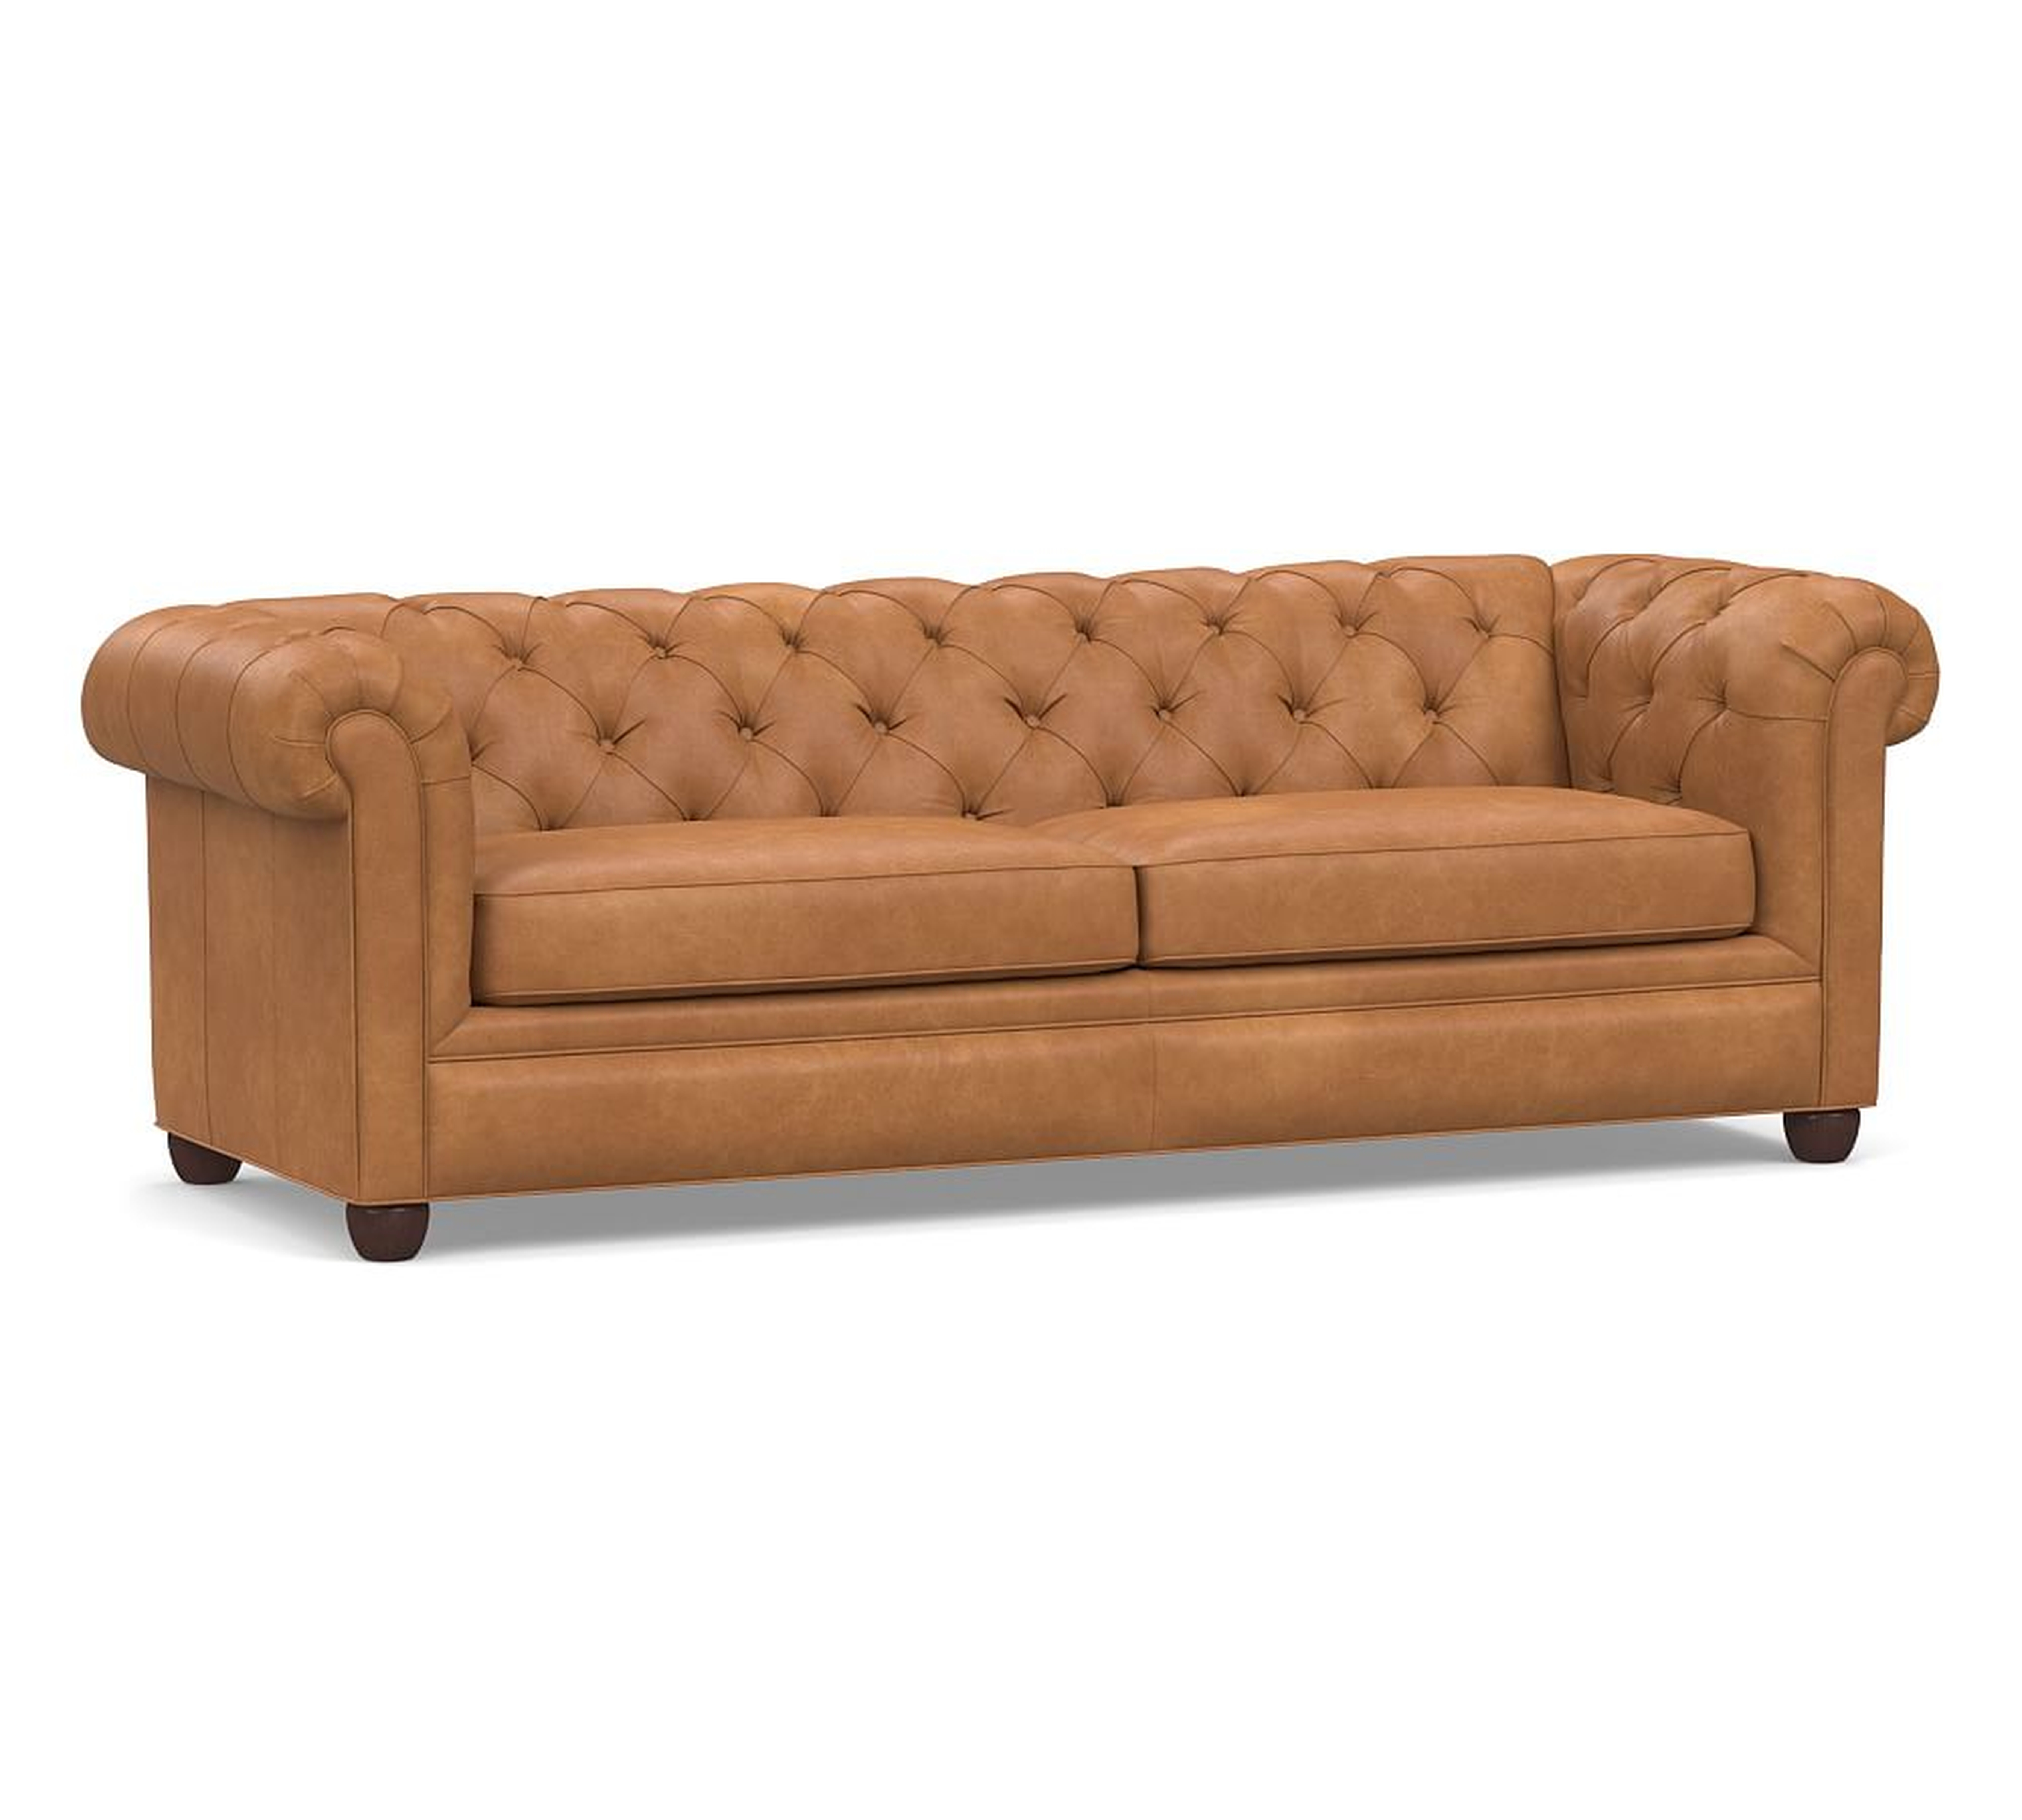 Chesterfield Roll Arm Leather Grand Sofa 96", Polyester Wrapped Cushions, Churchfield Camel - Pottery Barn